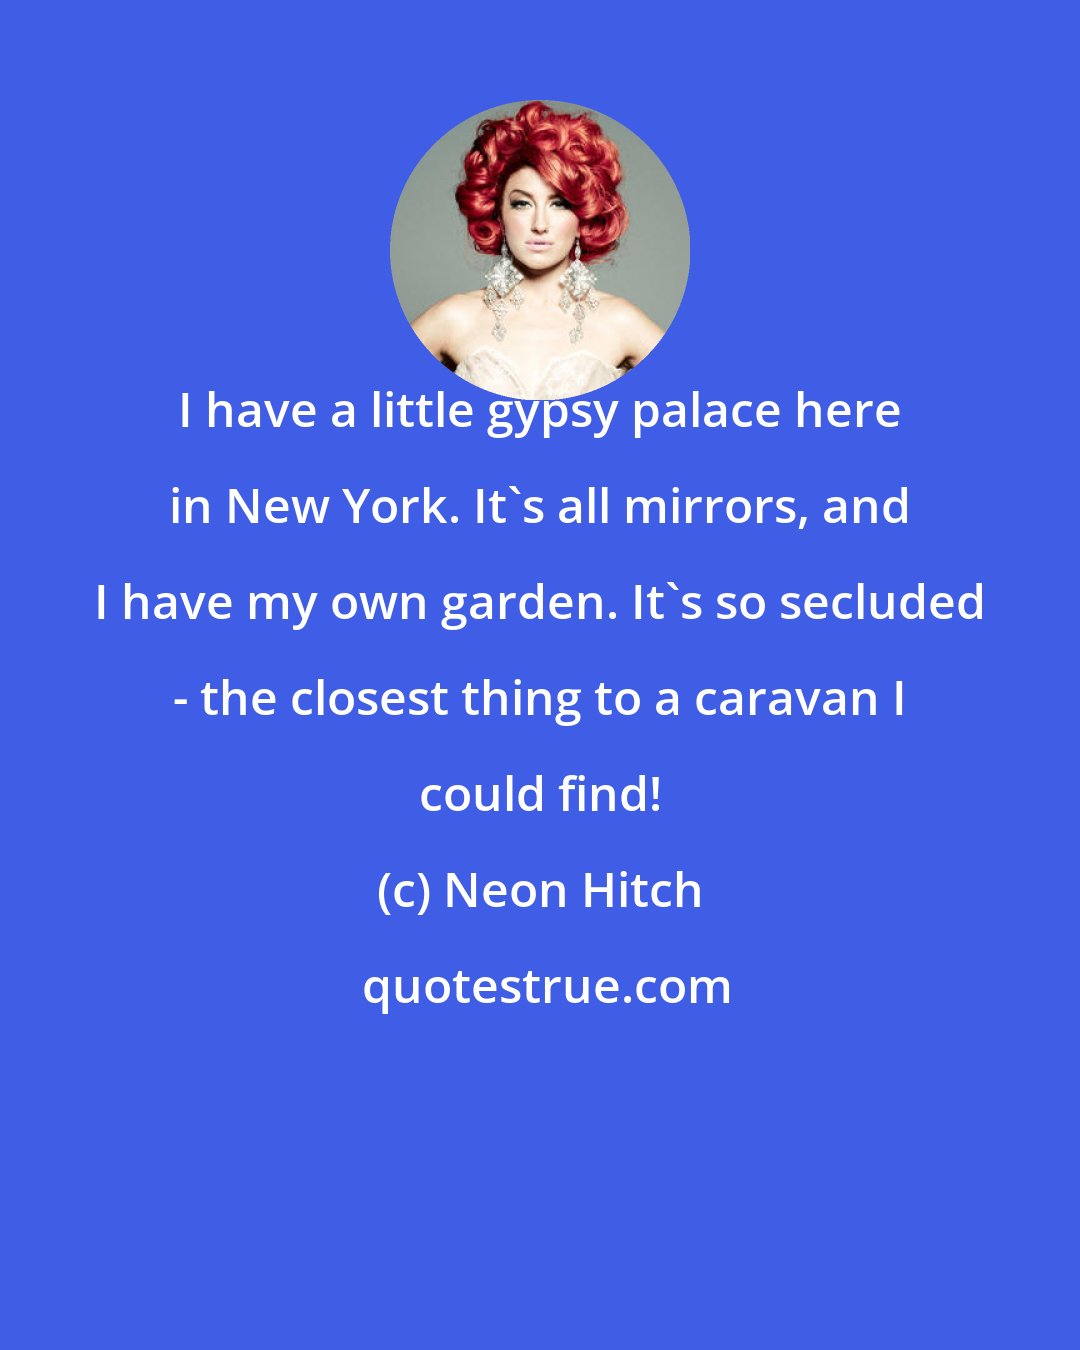 Neon Hitch: I have a little gypsy palace here in New York. It's all mirrors, and I have my own garden. It's so secluded - the closest thing to a caravan I could find!